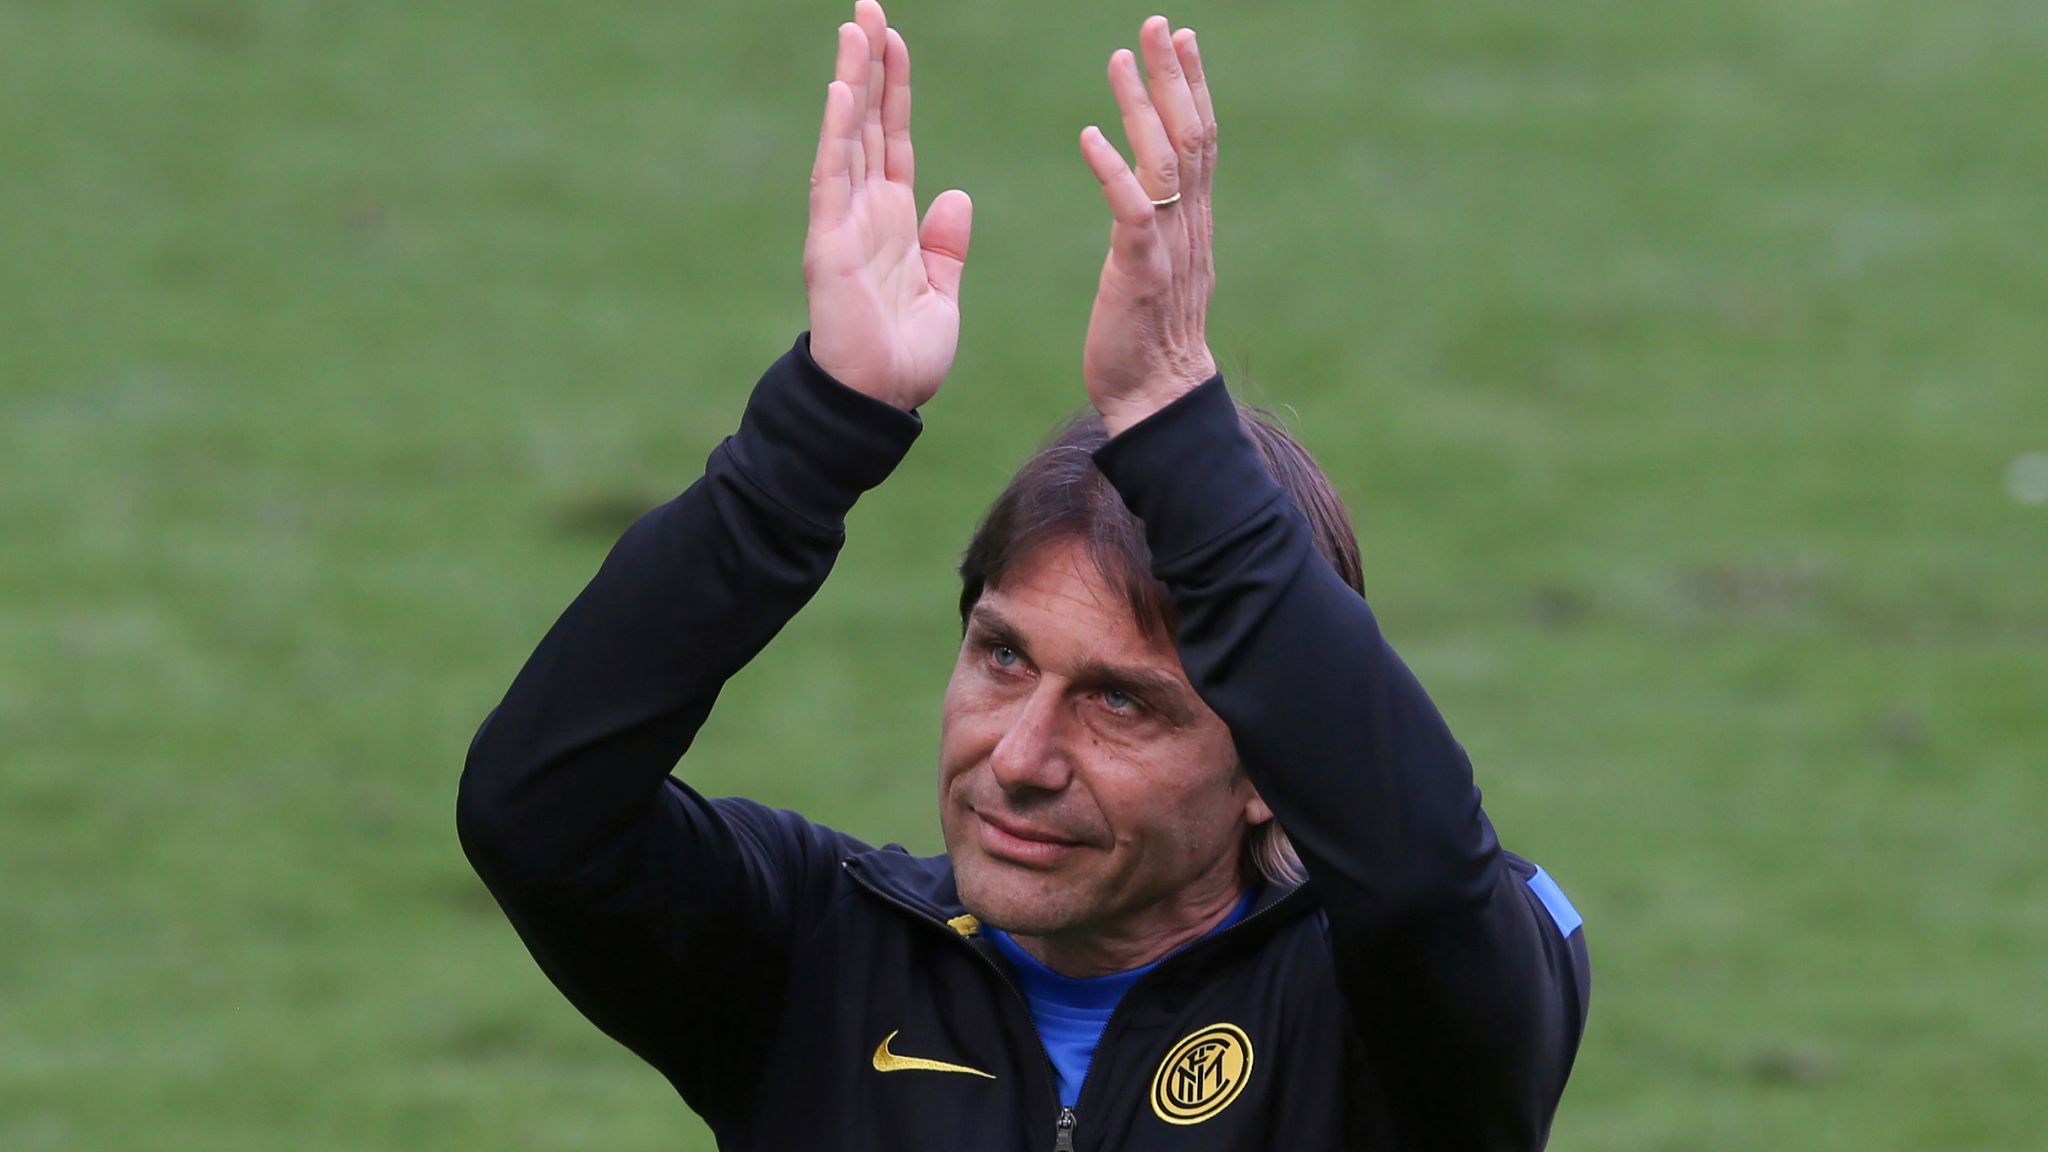 Conte leaves Inter over dispute with club owners following Serie A title  win